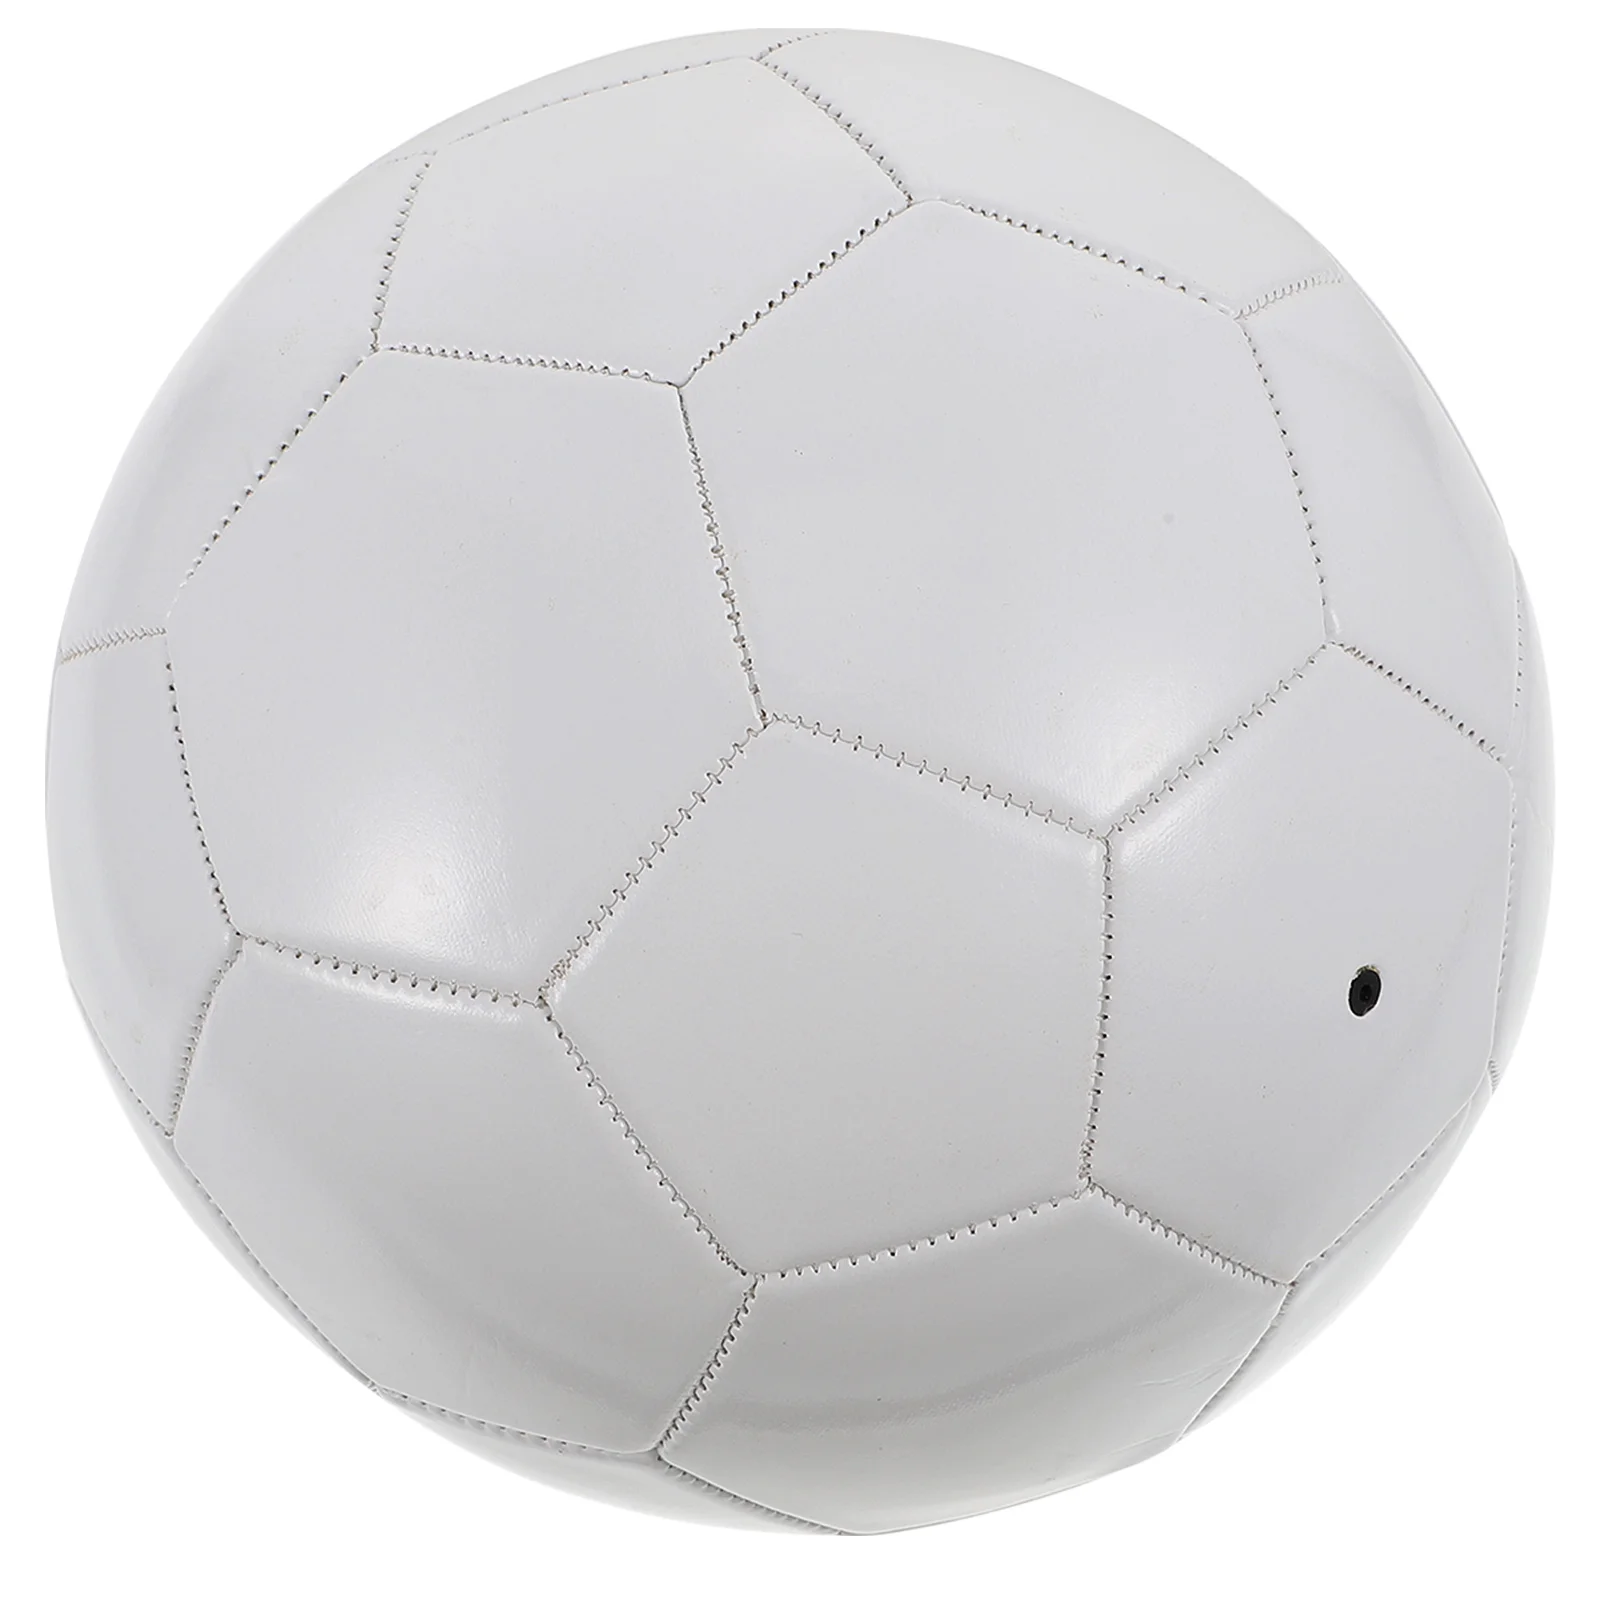 

White Football DIY Educational Toddler Outdoor Toy outside Toys for Toddlers Sports Training Match Soccer